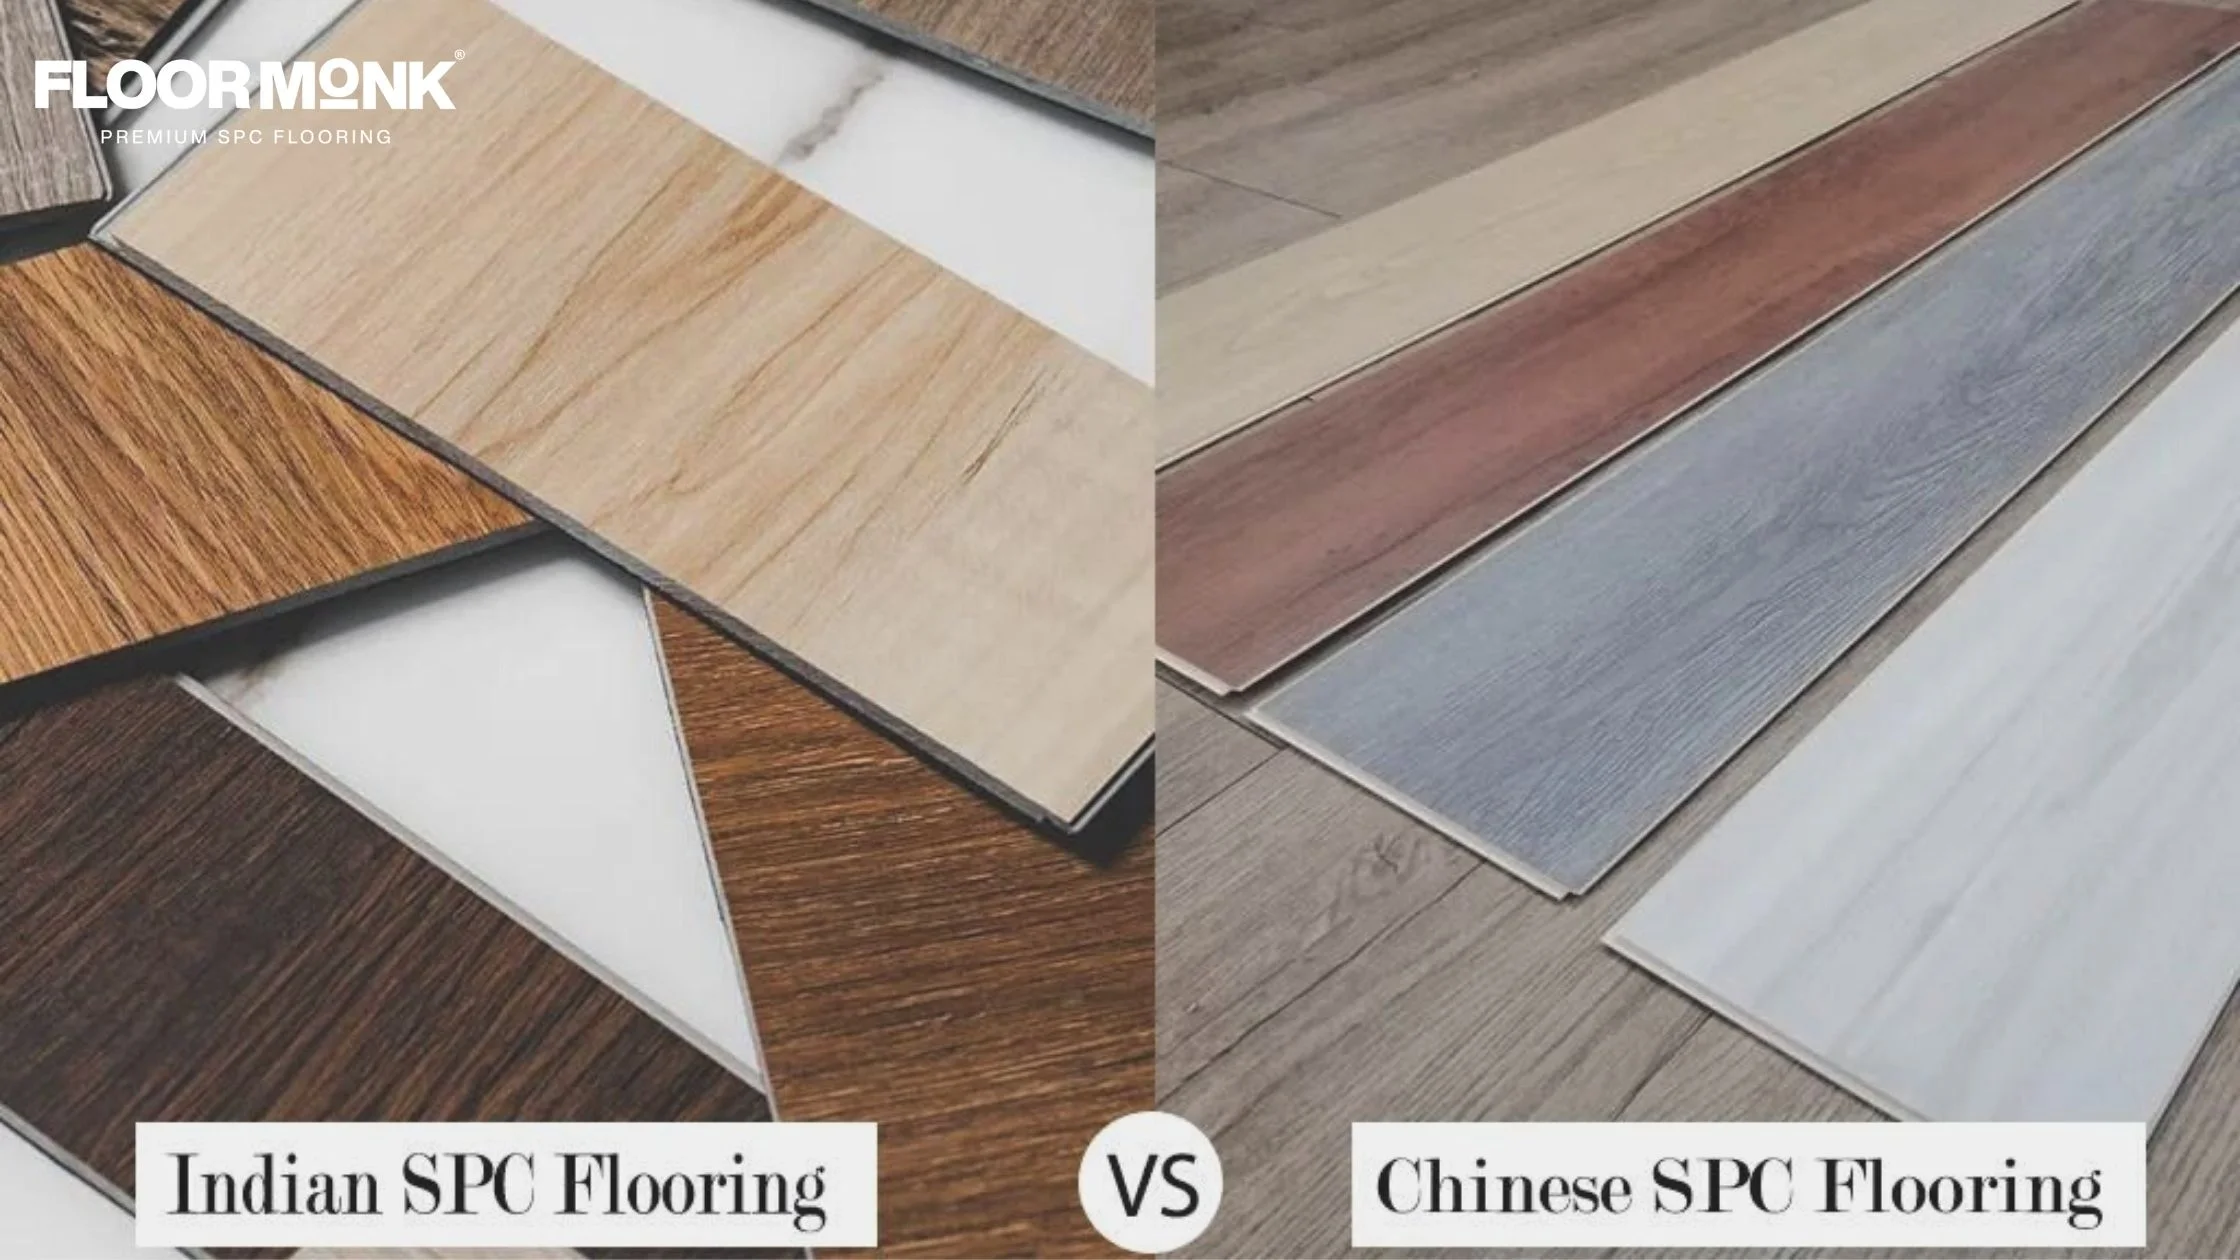 Indian SPC Flooring Vs Chinese SPC Flooring Which Is Better?